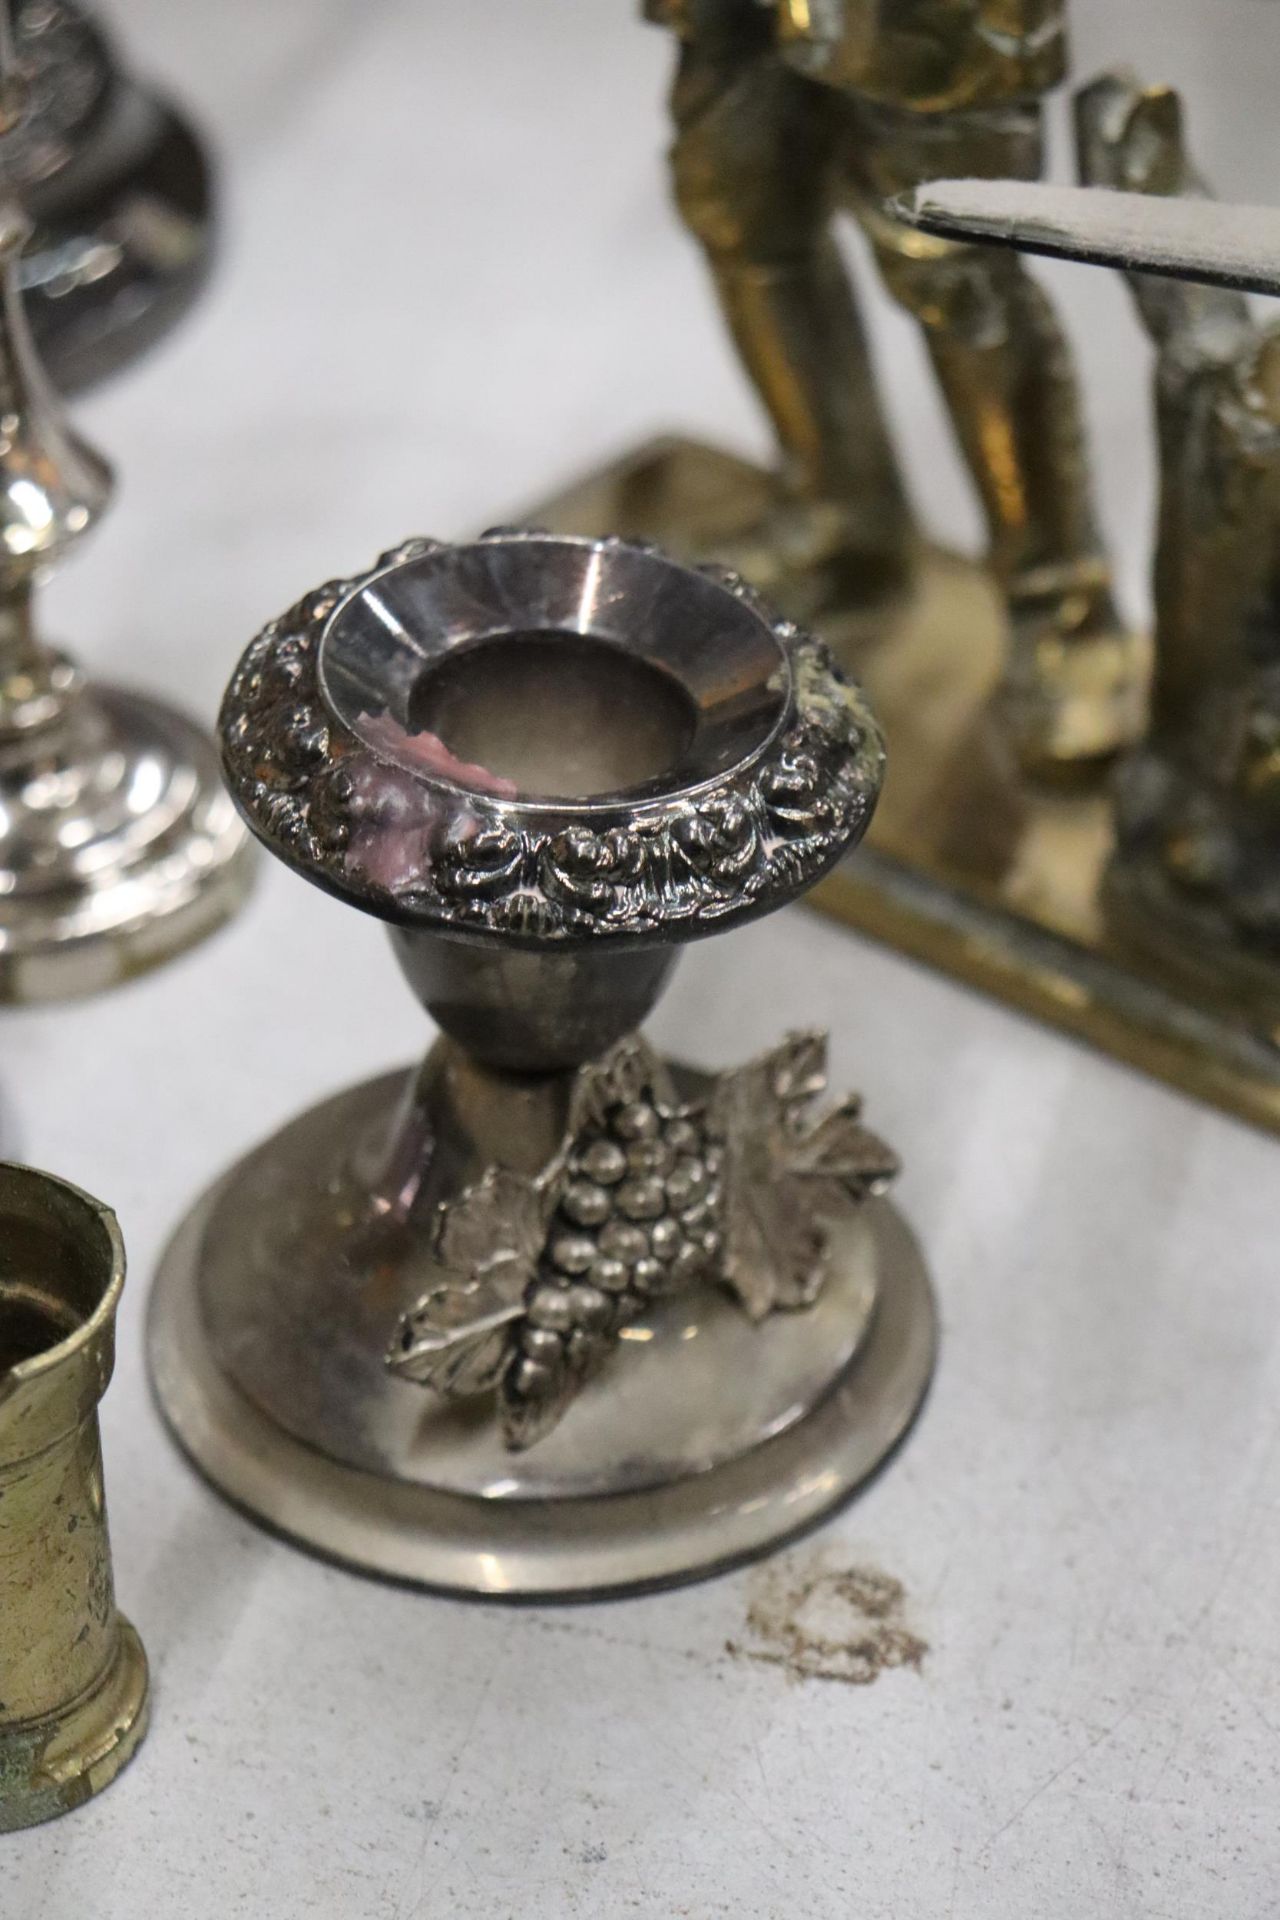 A QUANTITY OF BRASS AND SILVER PLATE TO INCLUDE A HEAVY POACHER FIGURE, CANDLESTICKS, ANIMAL - Image 12 of 15